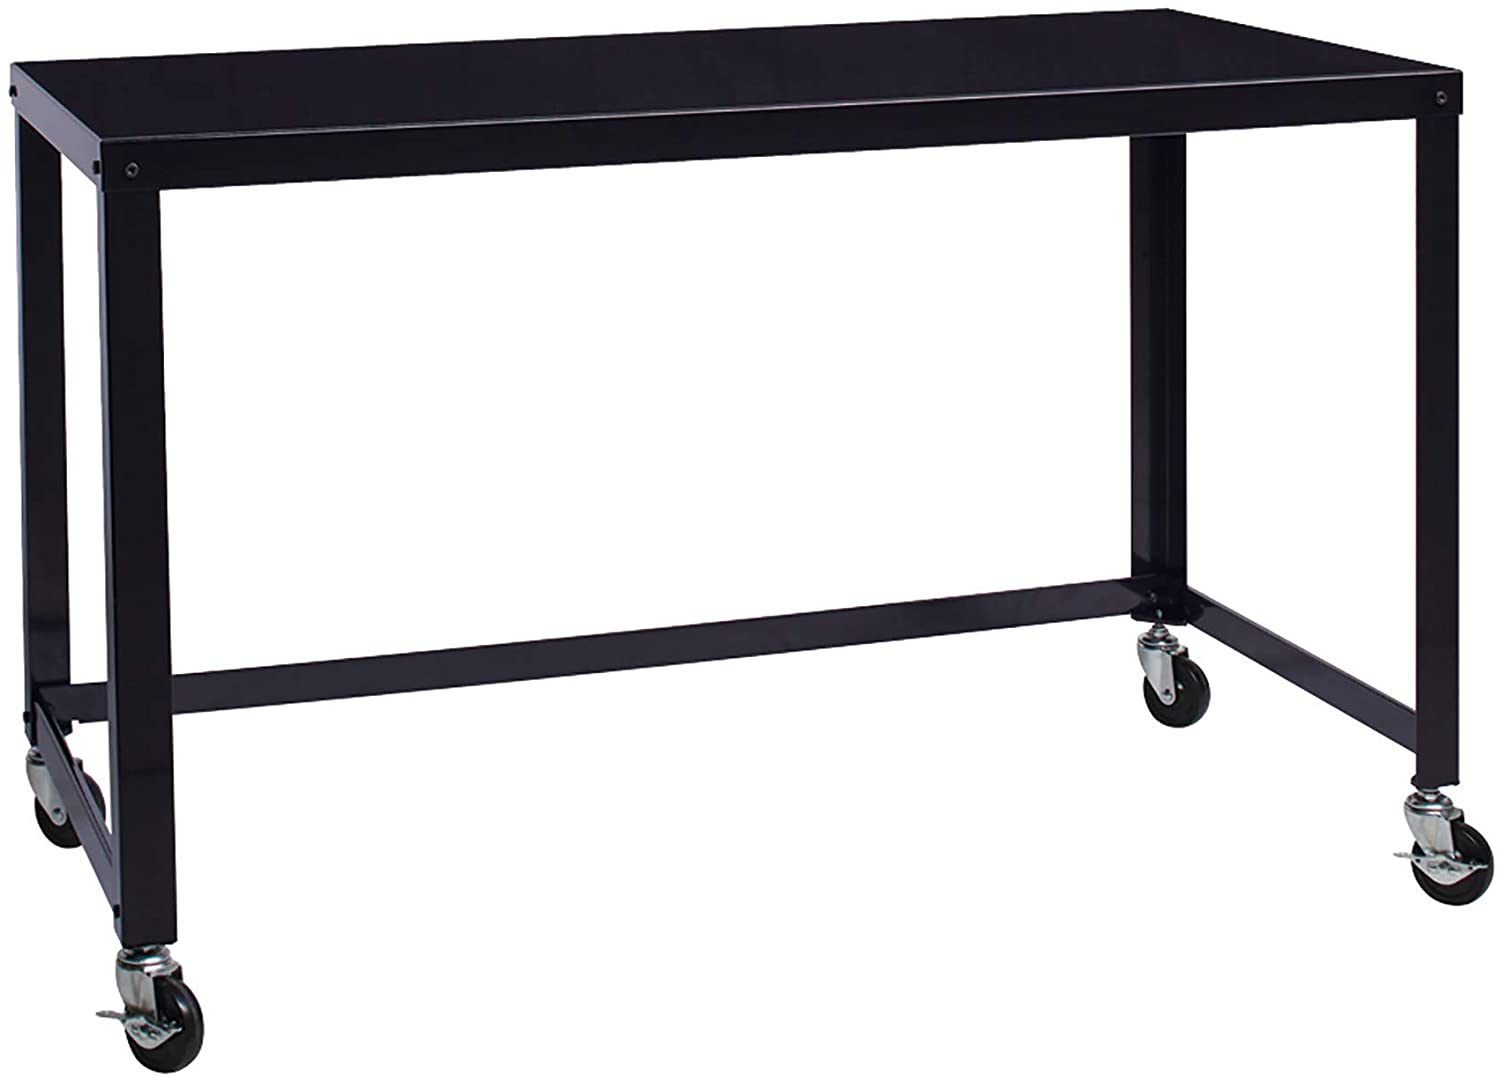 Photo 1 of Office Dimensions 21647 Black RTA 48 Wide Mobile Metal Desk Workstation Home Office Collection 295 x 48 x 24